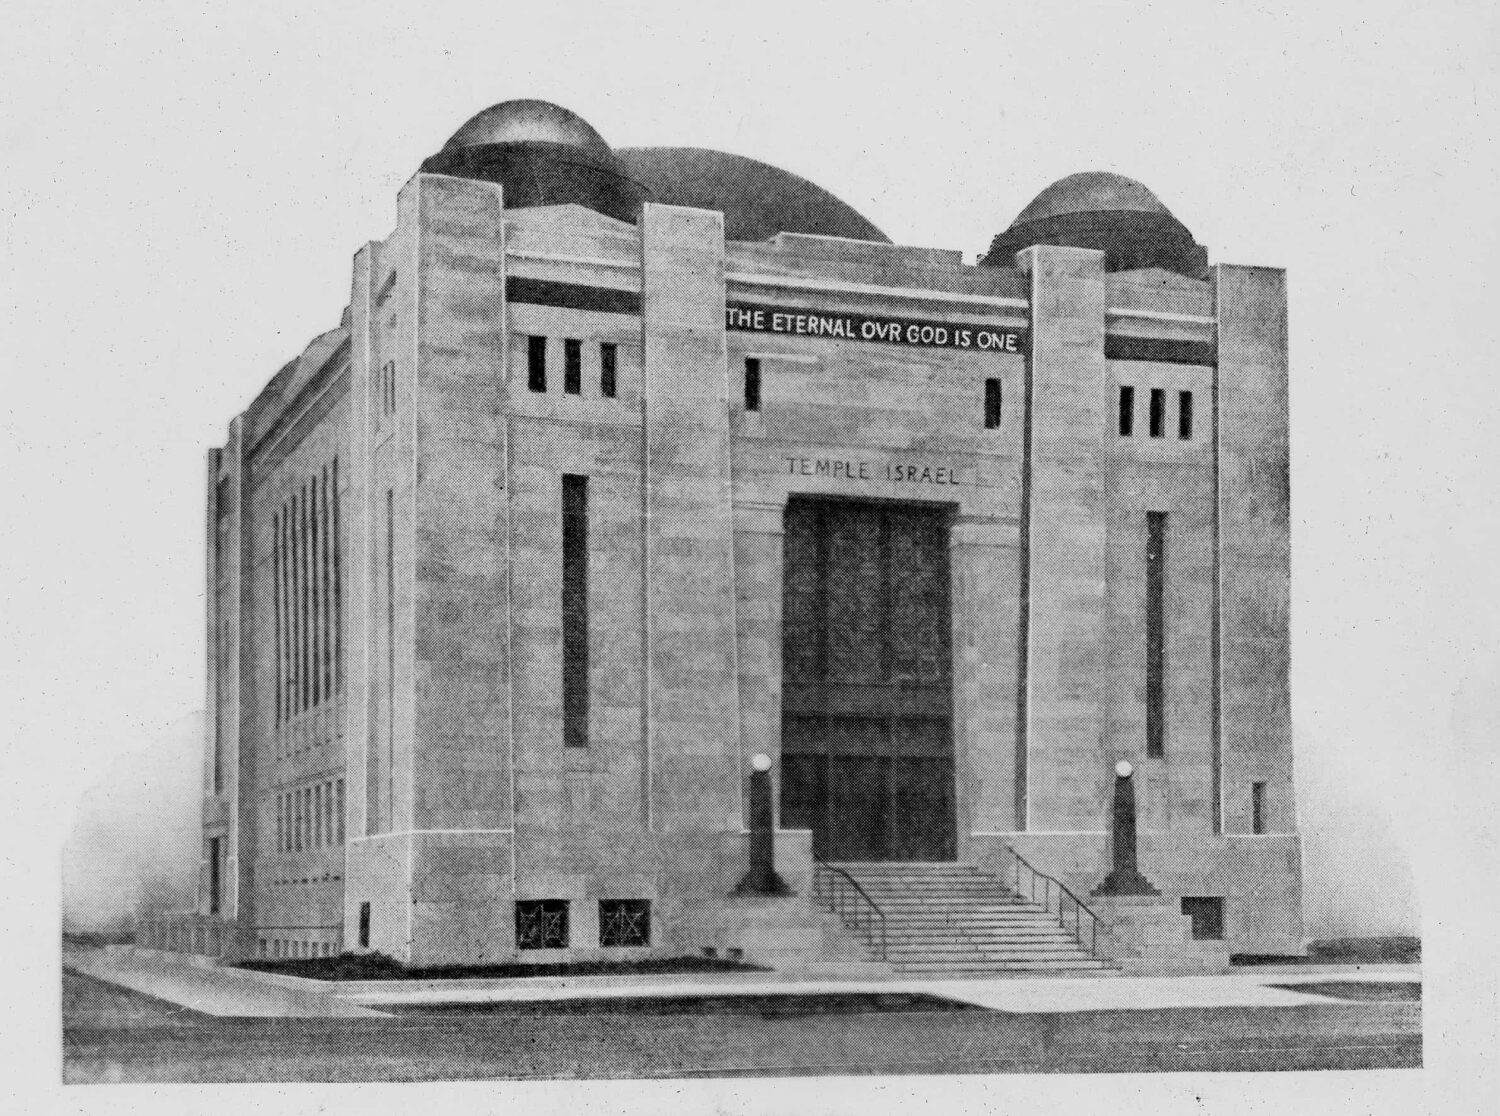 Commonwealth Avenue synagogue